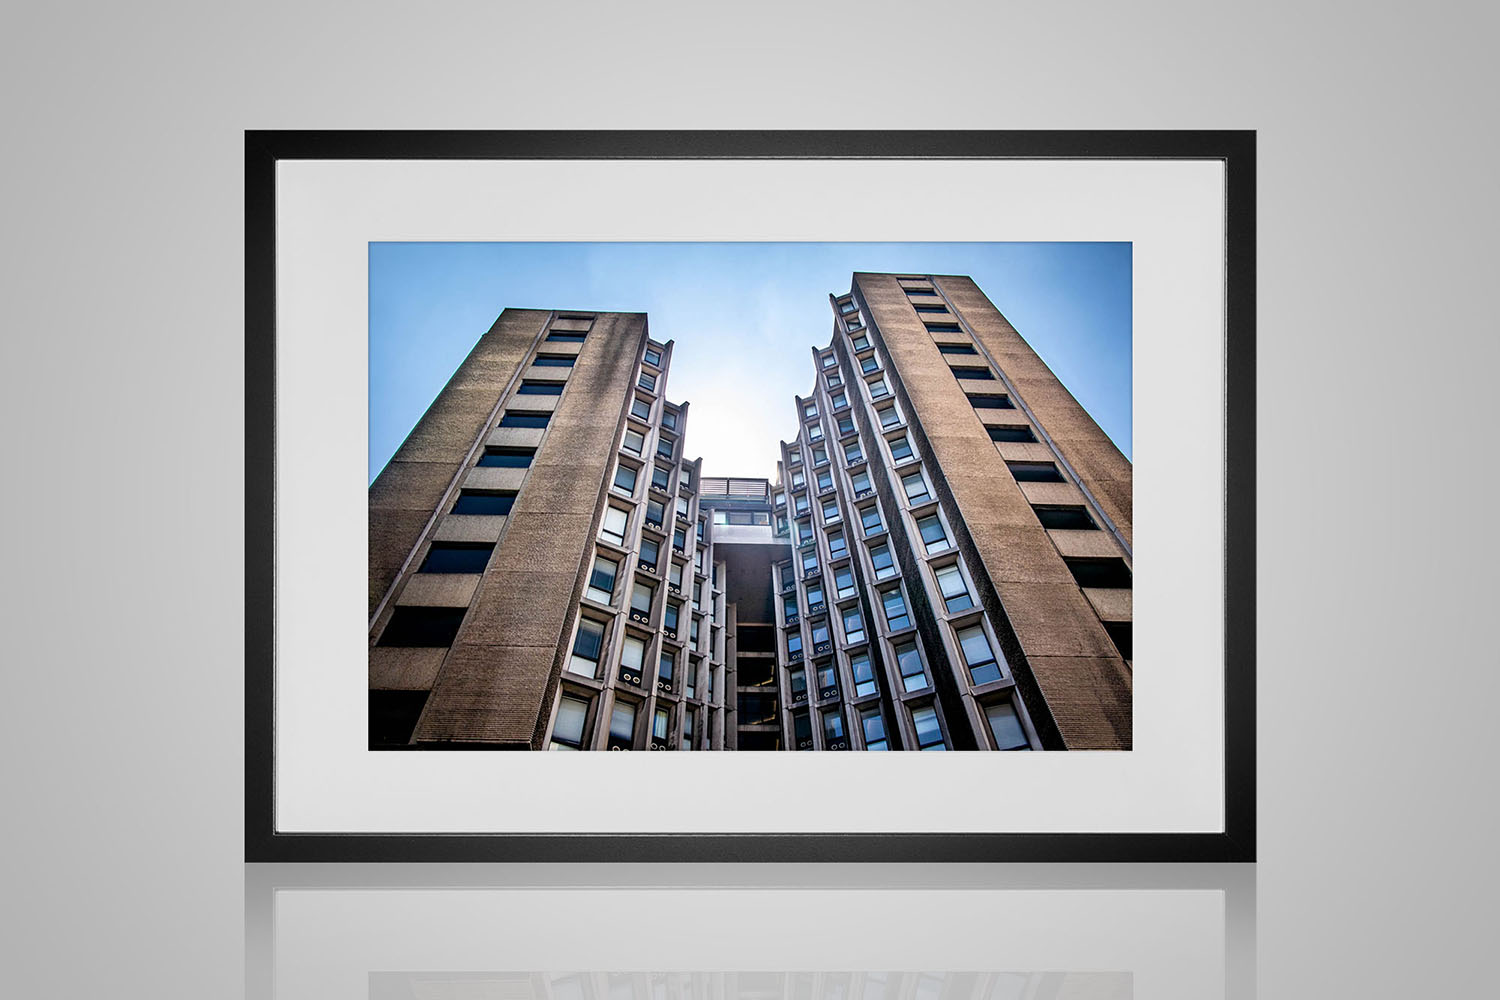 St. Giles Hotel - Liimited Edition Print